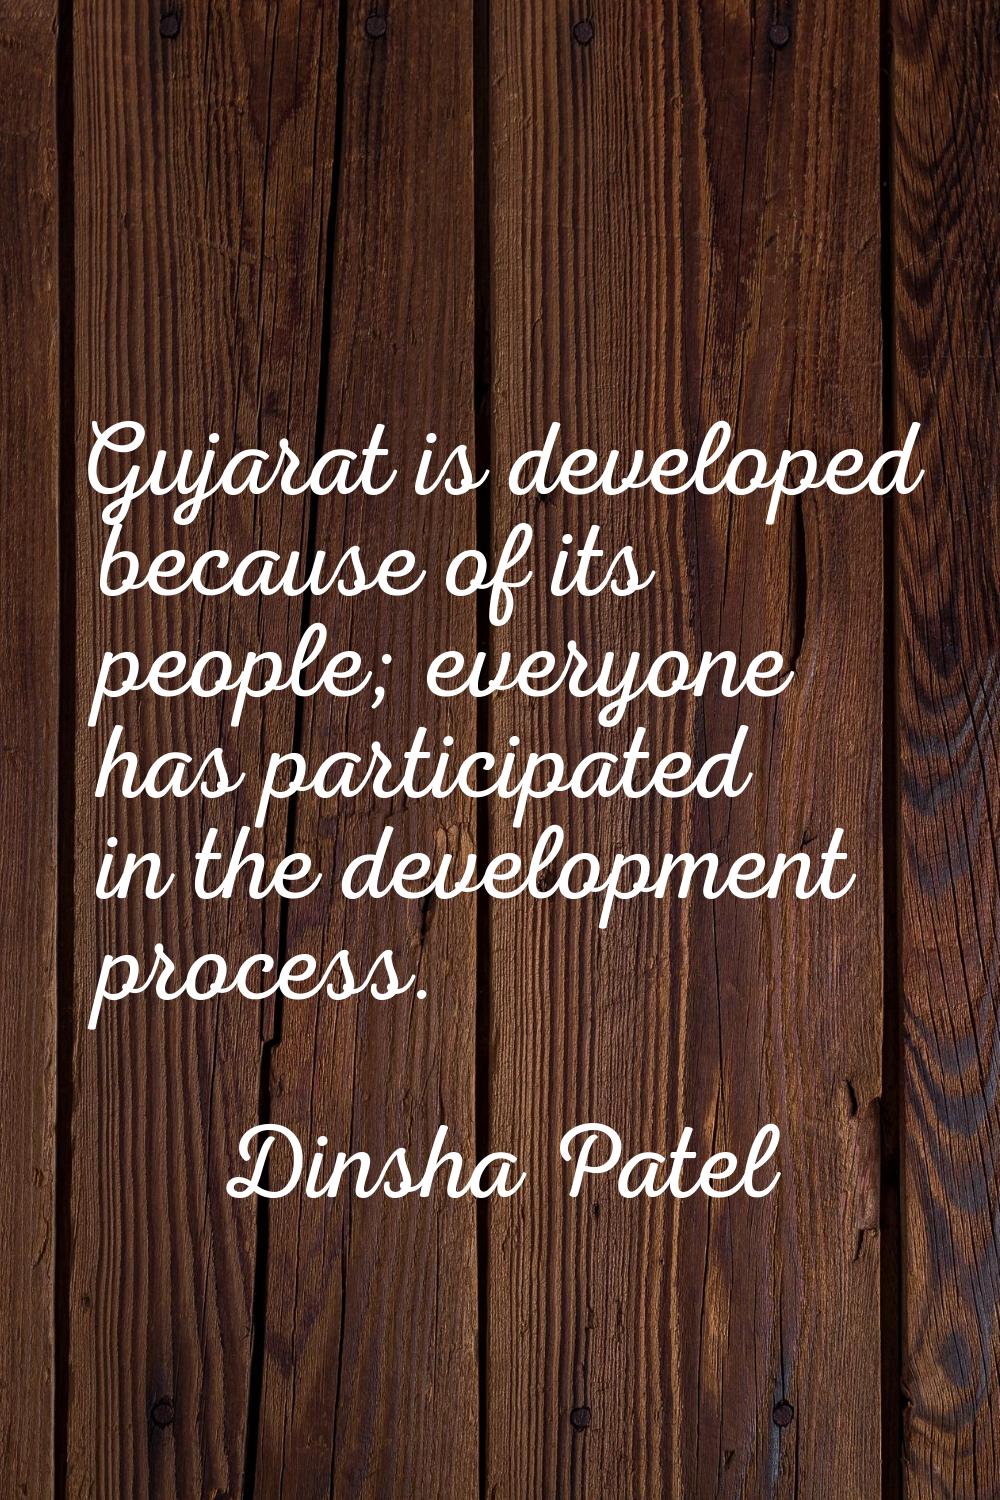 Gujarat is developed because of its people; everyone has participated in the development process.